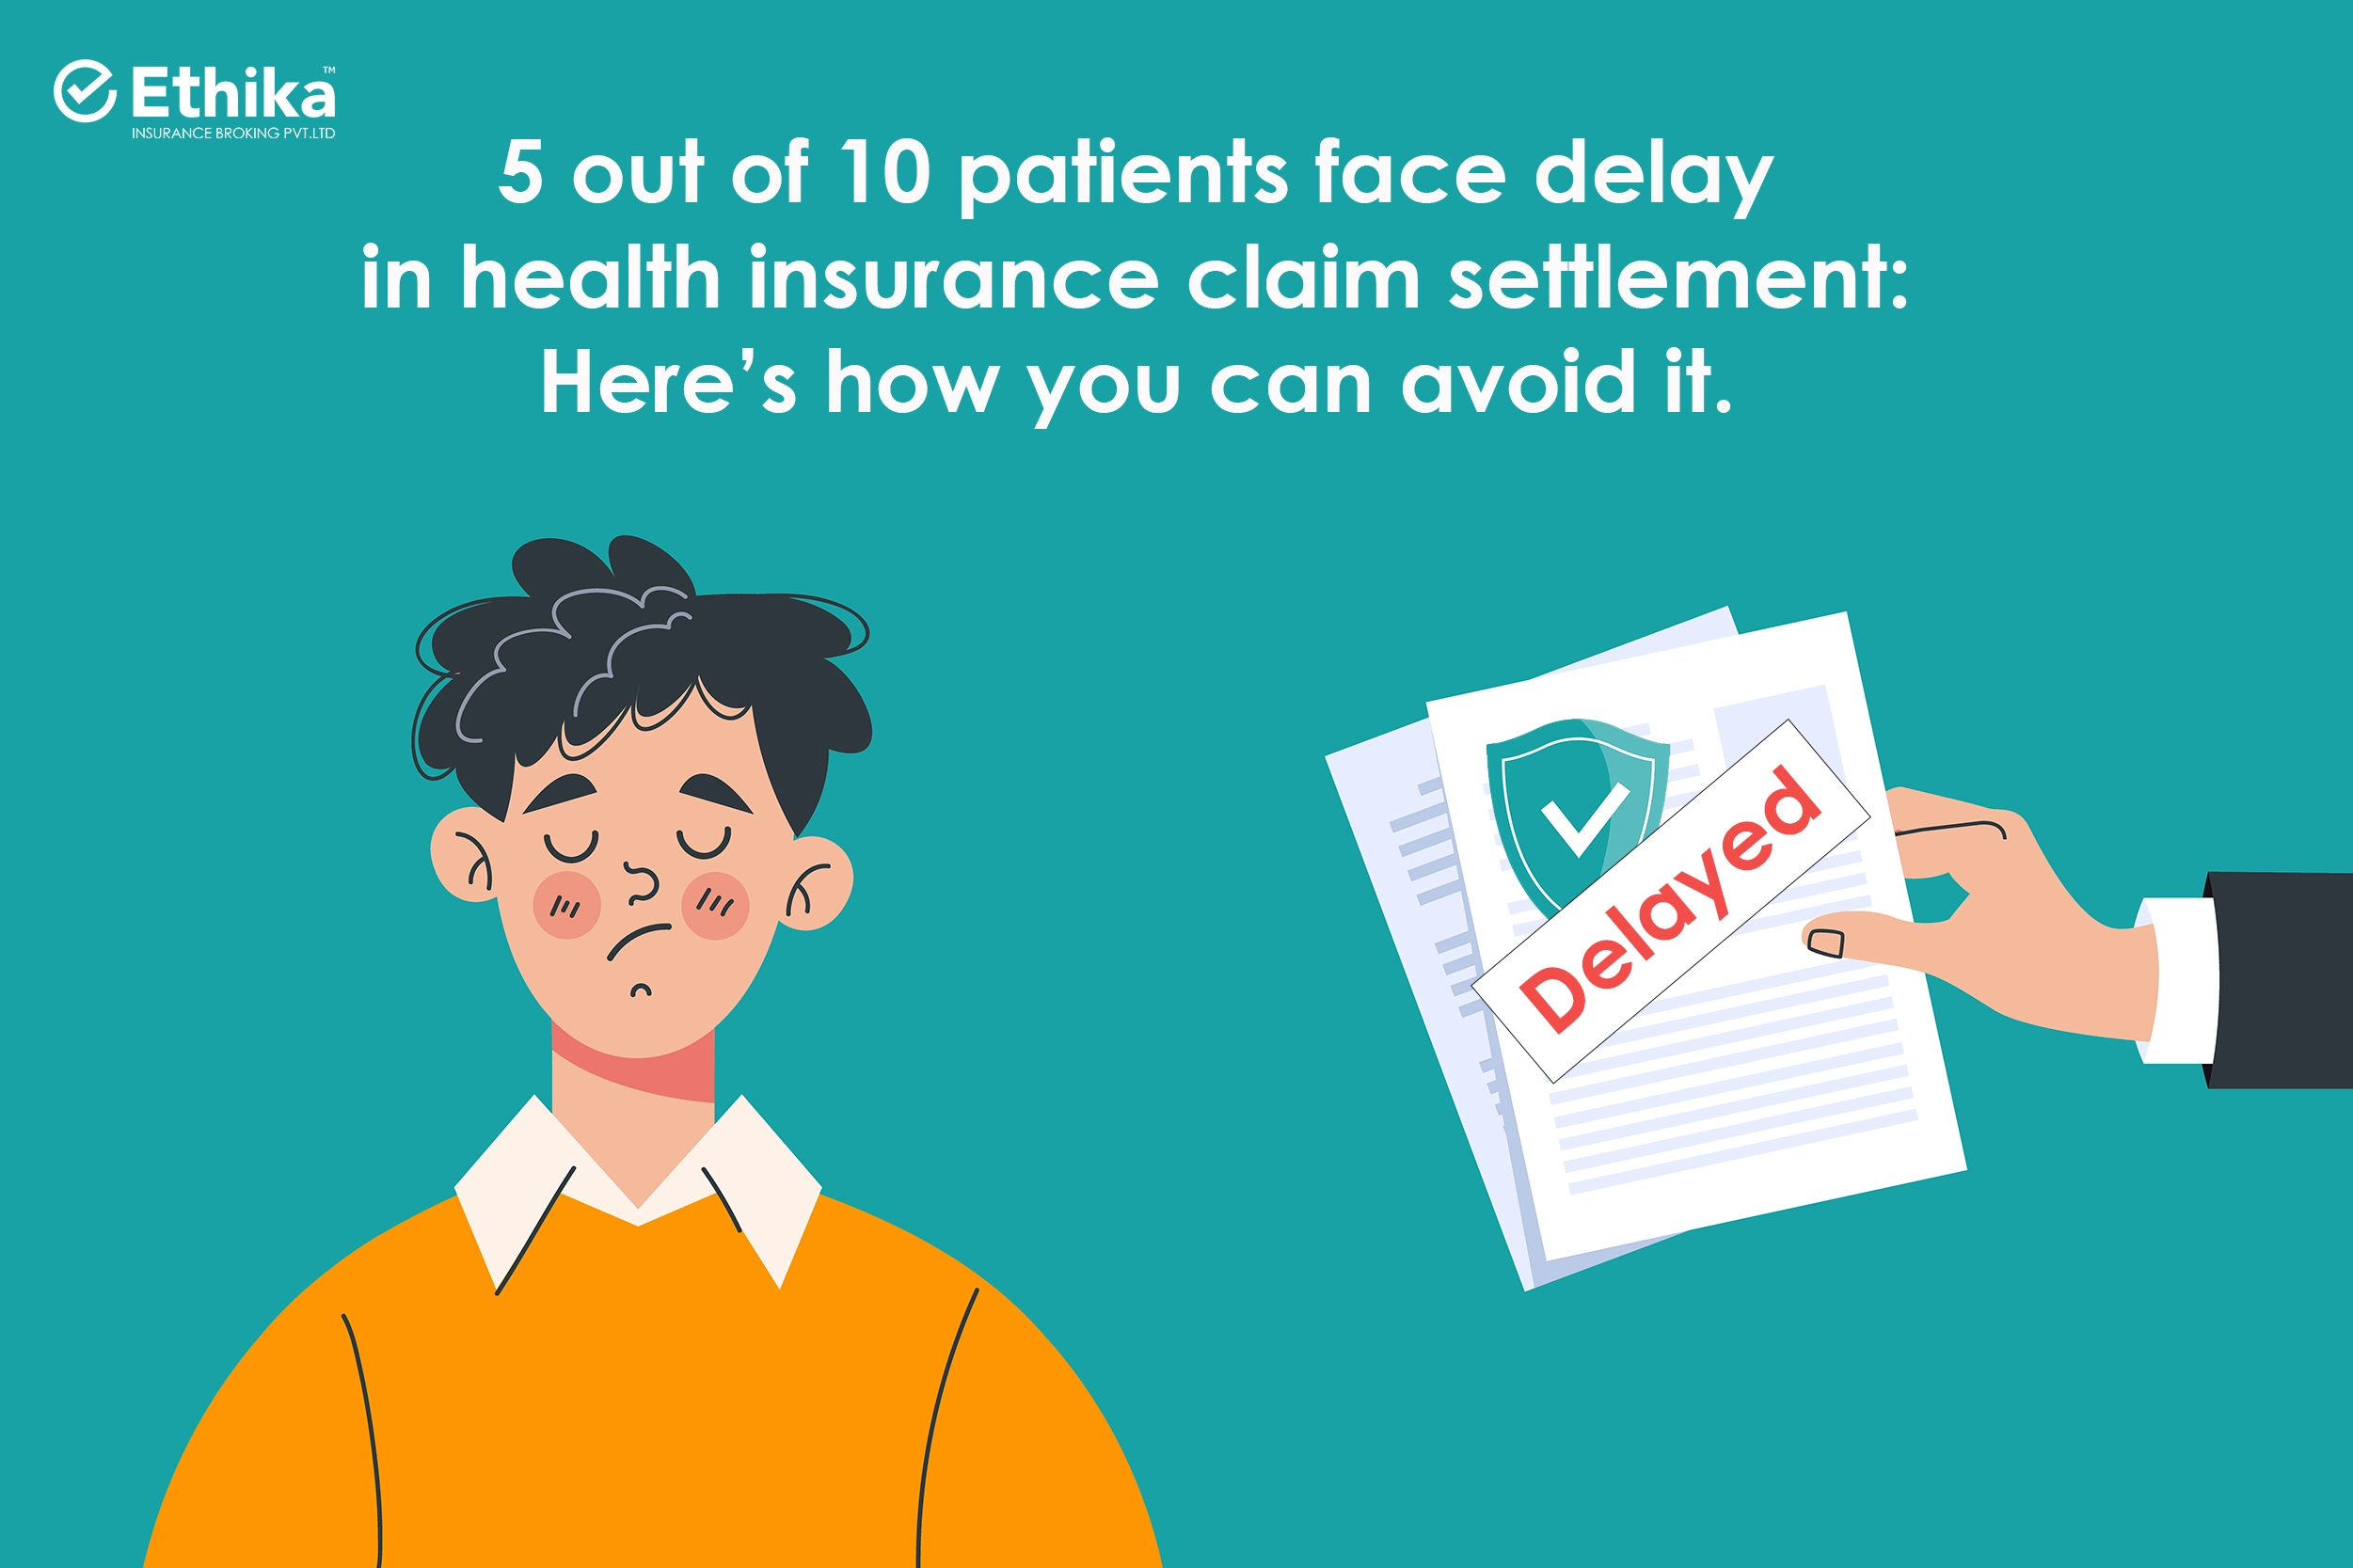 How to Avoid Health Insurance Claim Delays: 50% of Patients Face Settlement Issues